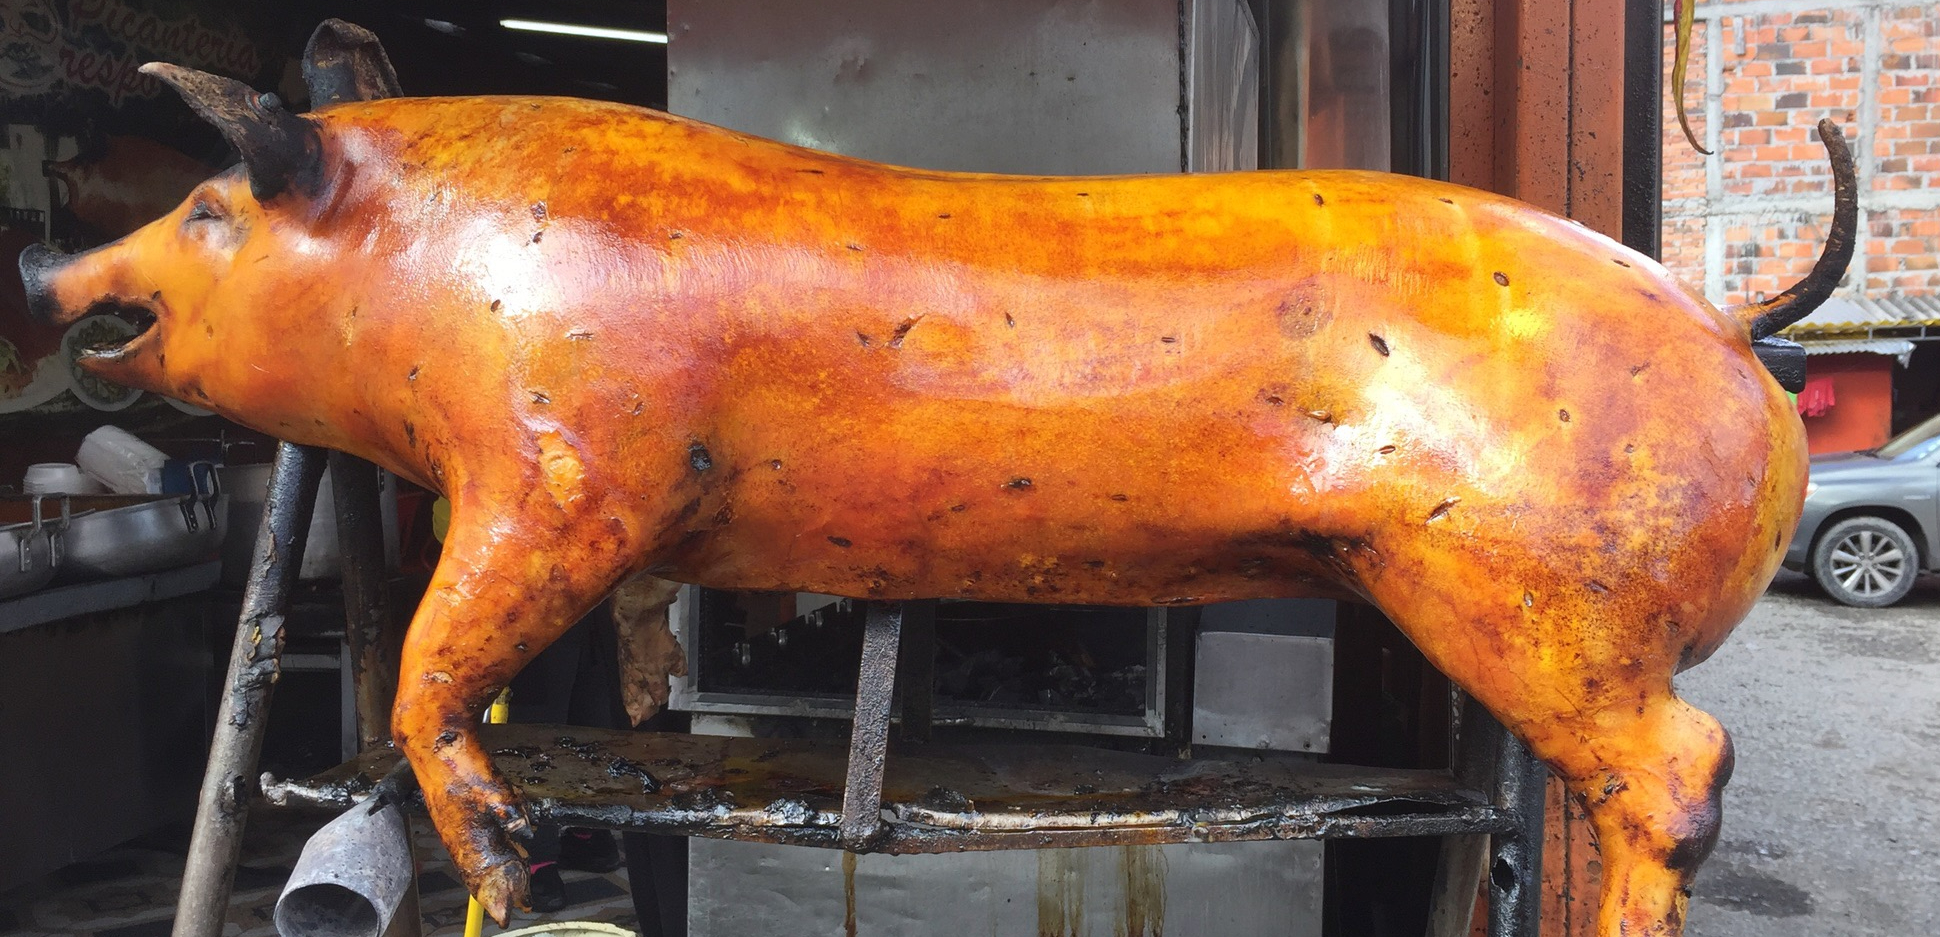 photo of an entire roasted pig